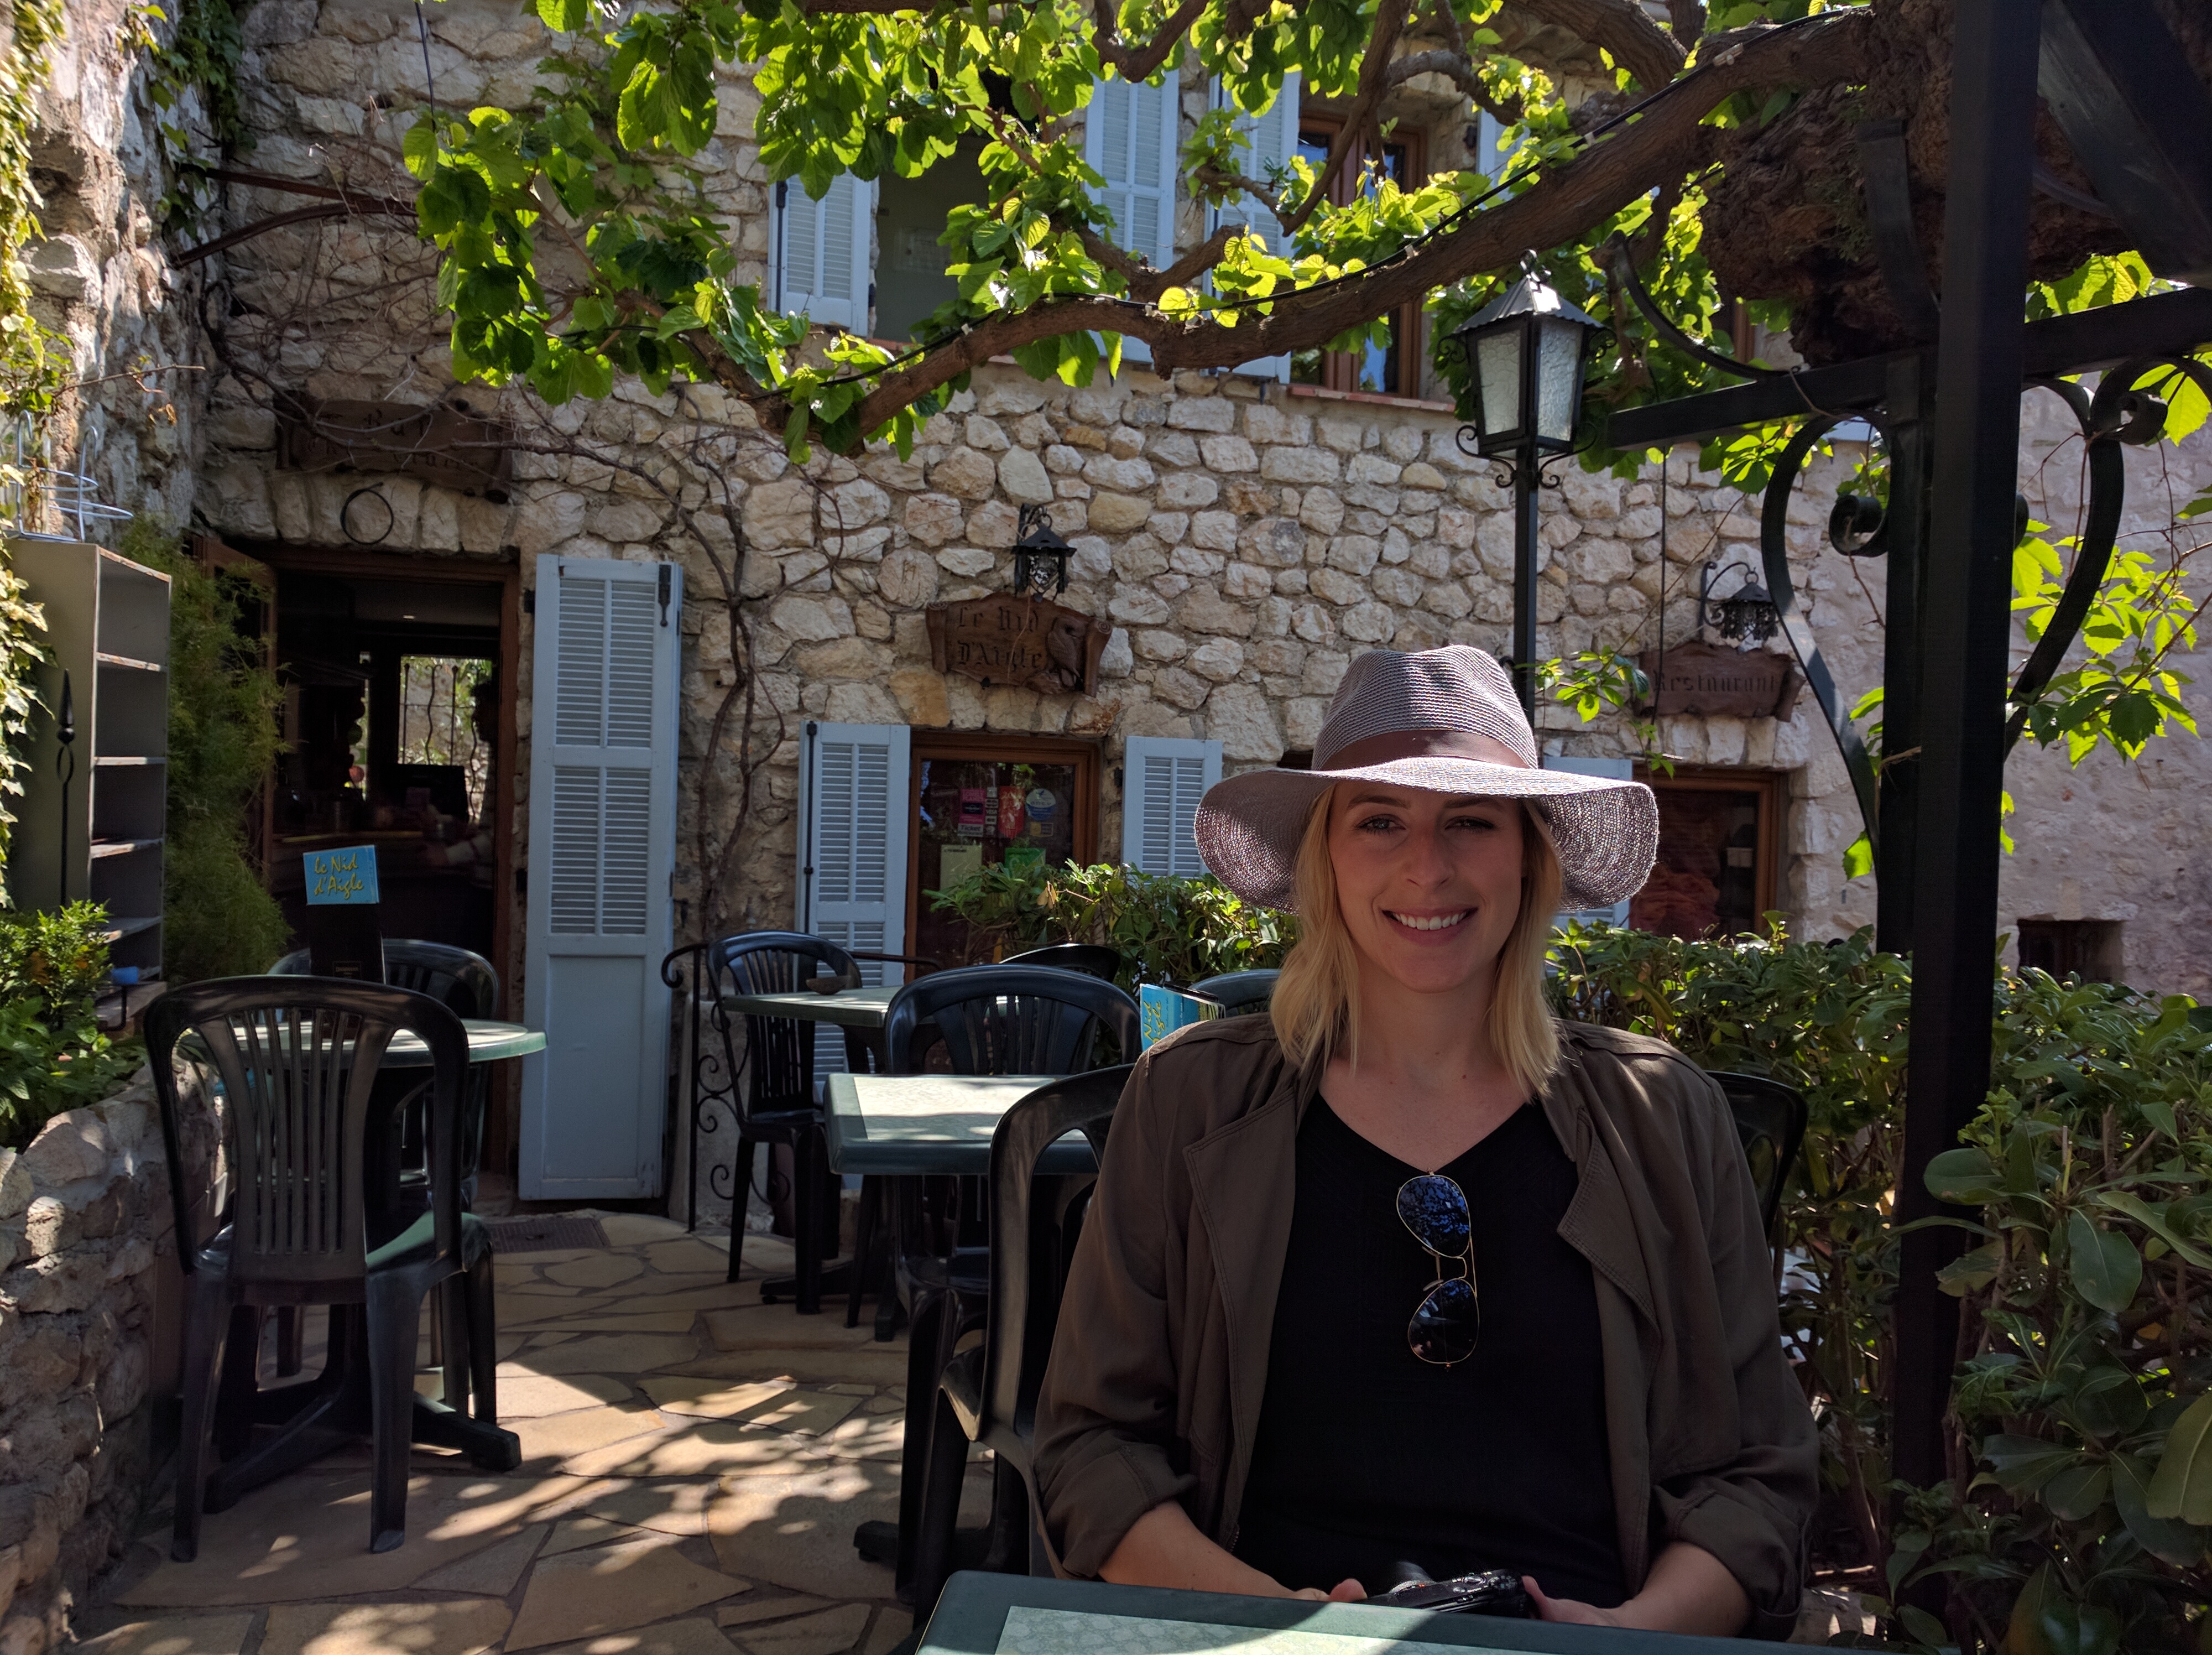 Kelly at breakfast this morning at the nearby, Le nid d'aigle